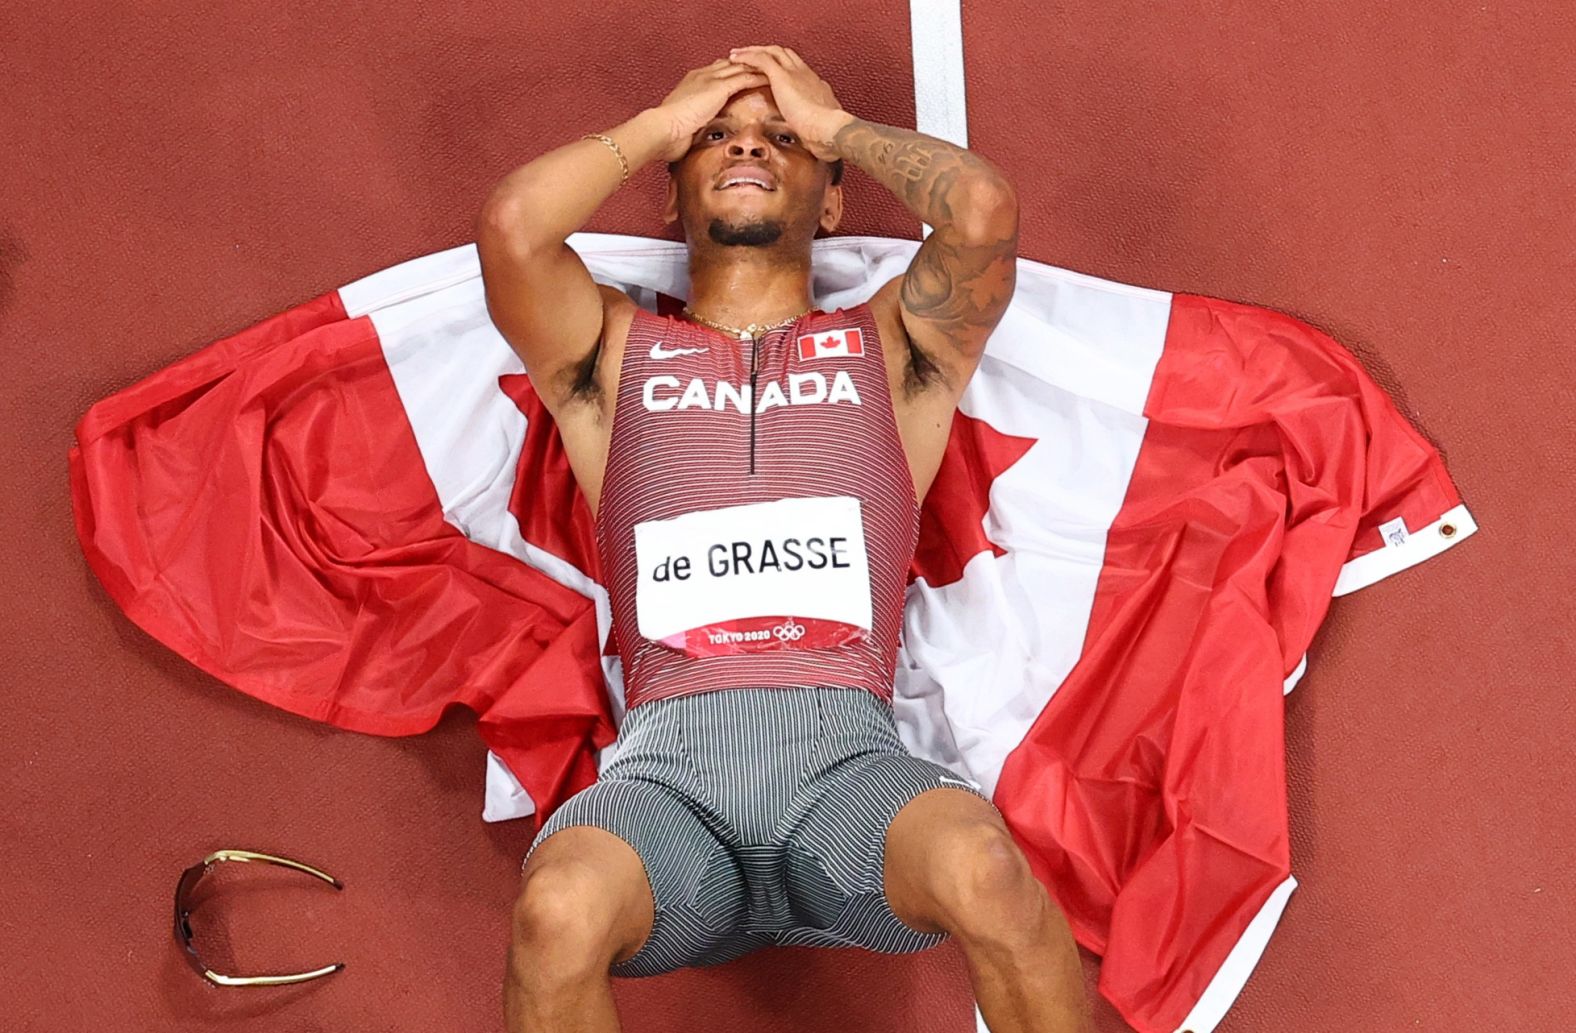 Canadian sprinter Andre De Grasse lies on the track after <a href="index.php?page=&url=https%3A%2F%2Fwww.cnn.com%2Fworld%2Flive-news%2Ftokyo-2020-olympics-08-04-21-spt%2Fh_329822ffaa1cc67218da92bea7a9c900" target="_blank">winning the 200-meter final</a> on August 4. It's the first Olympic gold for De Grasse, who won bronze in the 100 this year and was the silver medalist in the 200 five years ago.